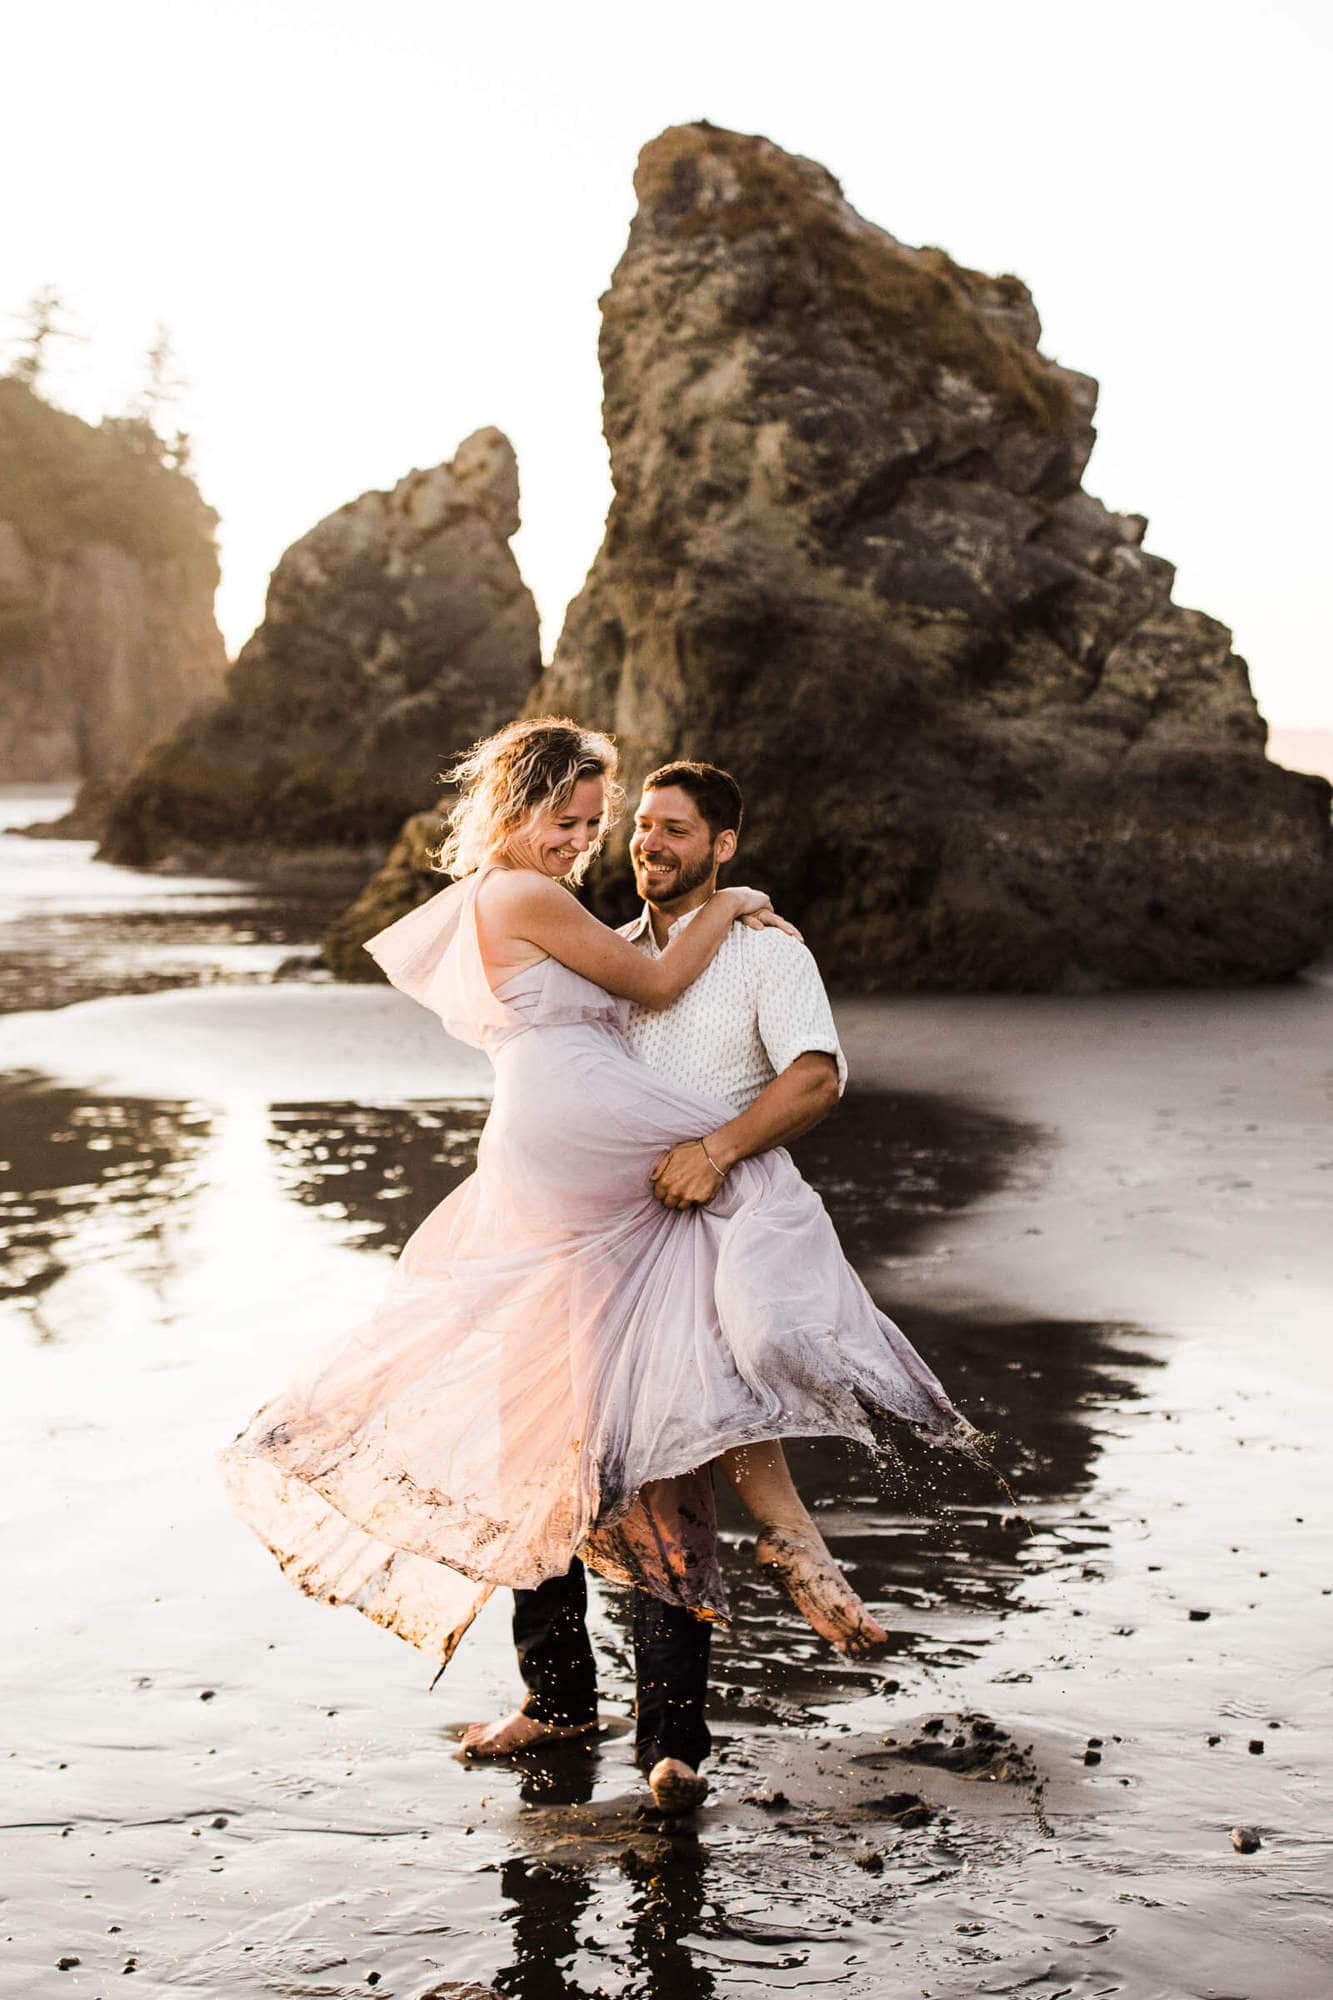 If you're looking for fun, adventure, the rugged PNW coast, and light to DIE for, look no further than this Olympic National Park elopement inspired shoot.